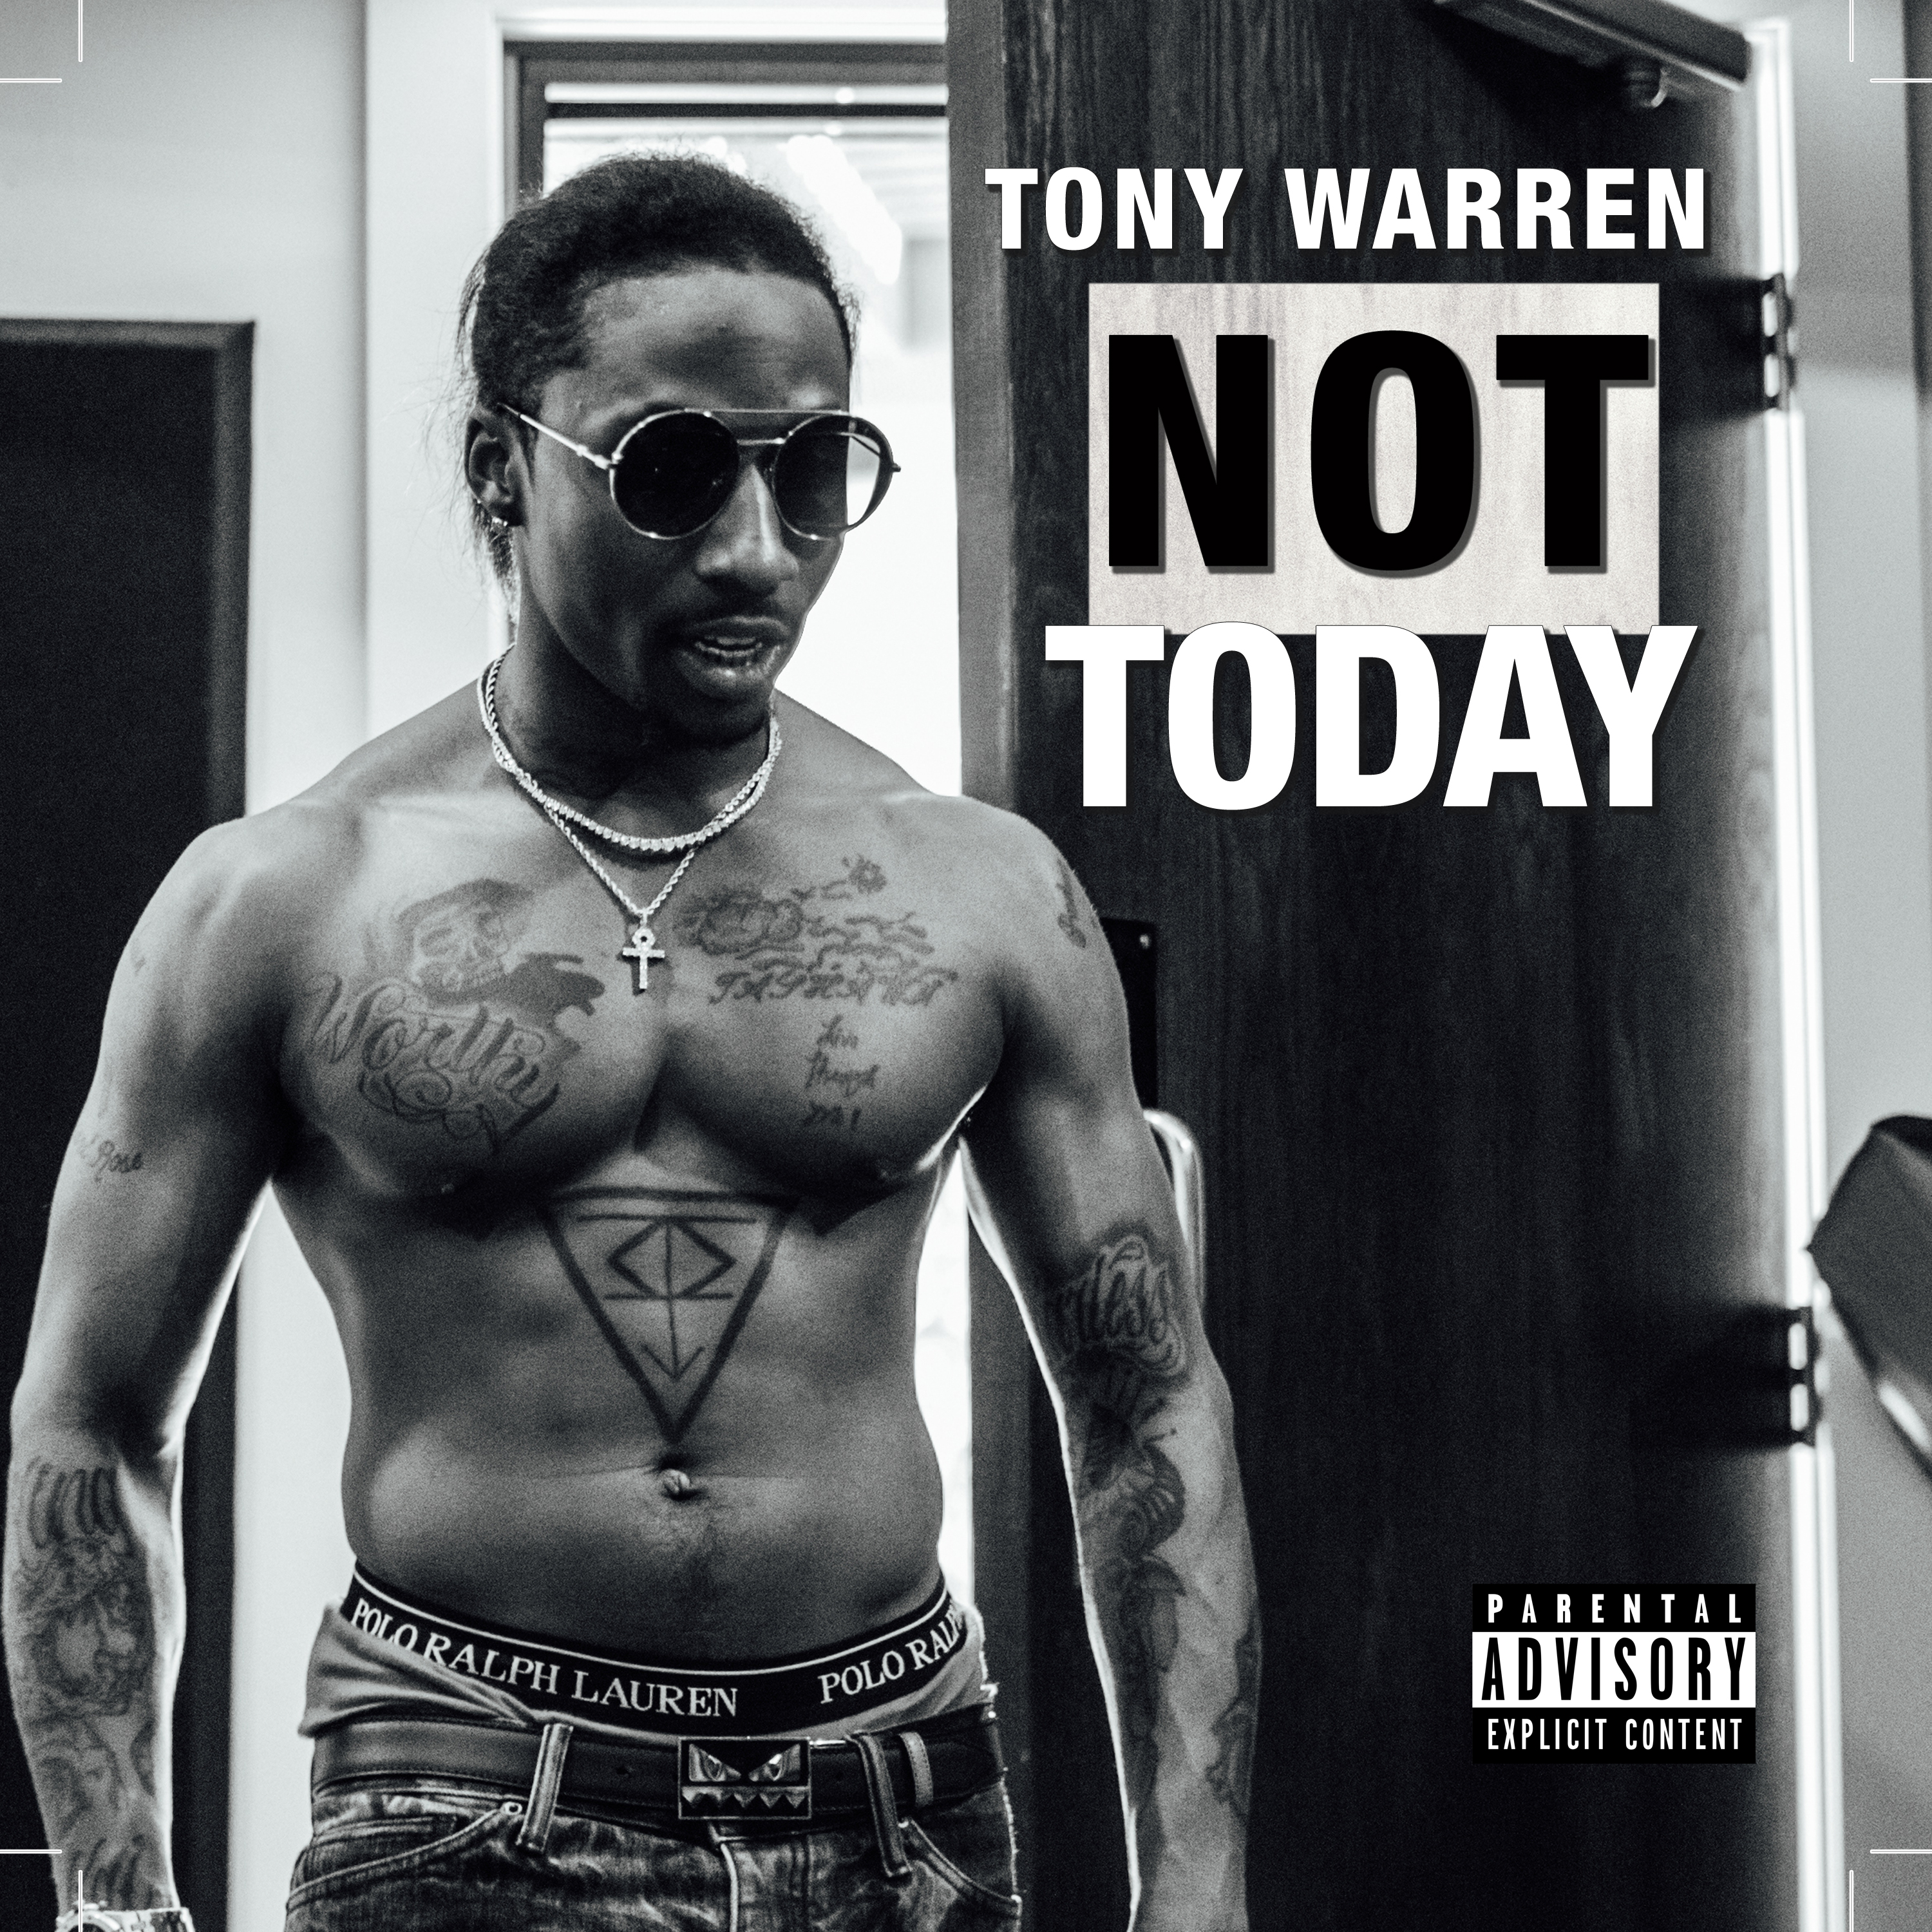 #PluggedIn Song Of the Day: Txny Warren “Not Today”